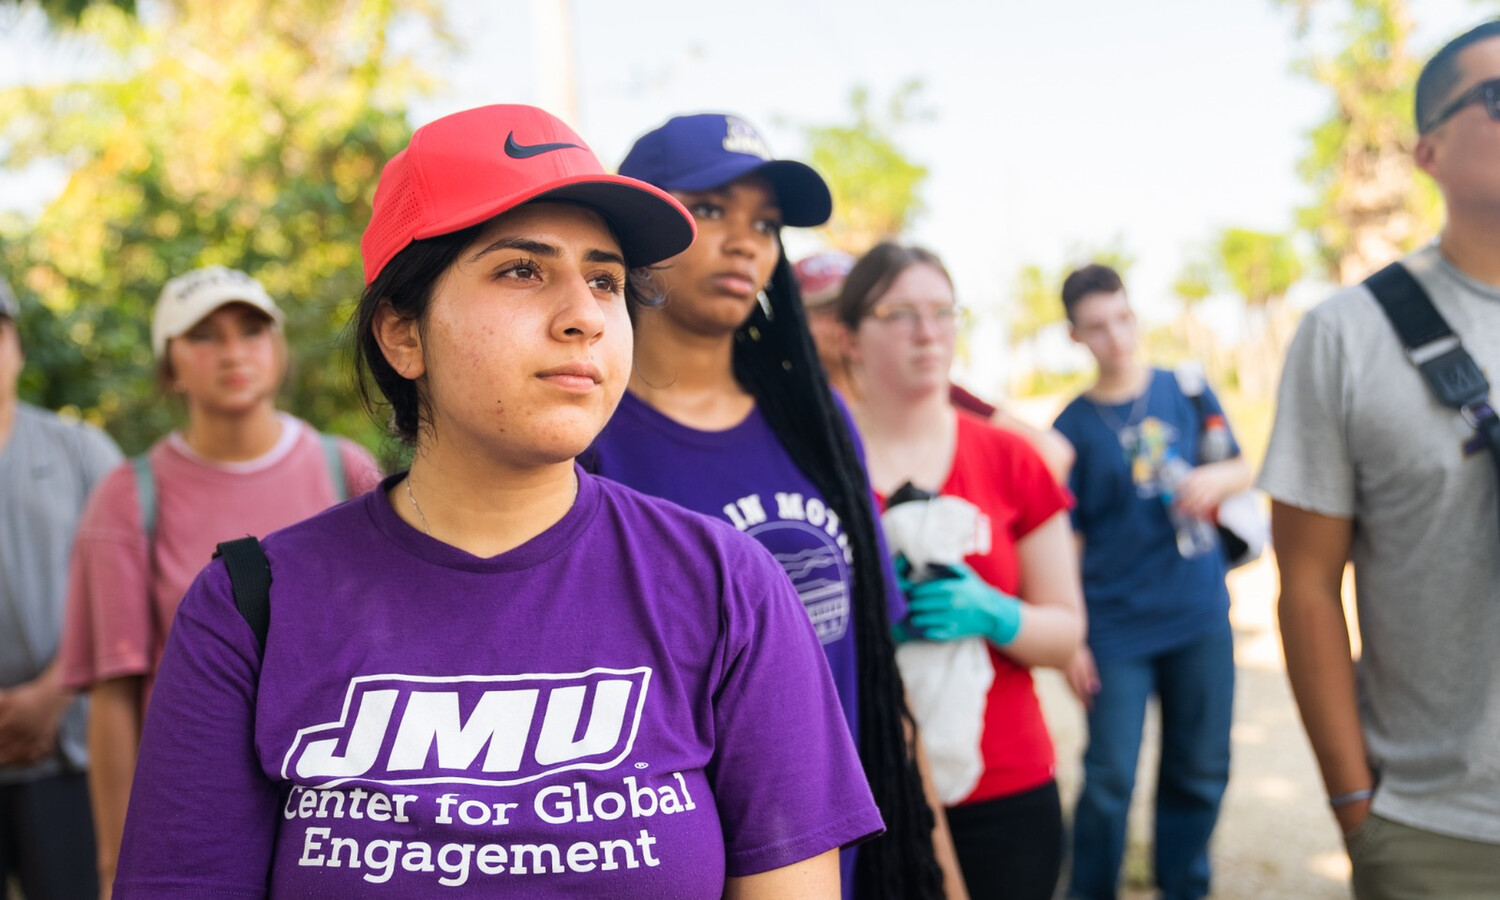 Shukrana Shukrulla wearing red Nike baseball cap and purple JMU T-shirt staring into distance. Other students stand behind her in the background.